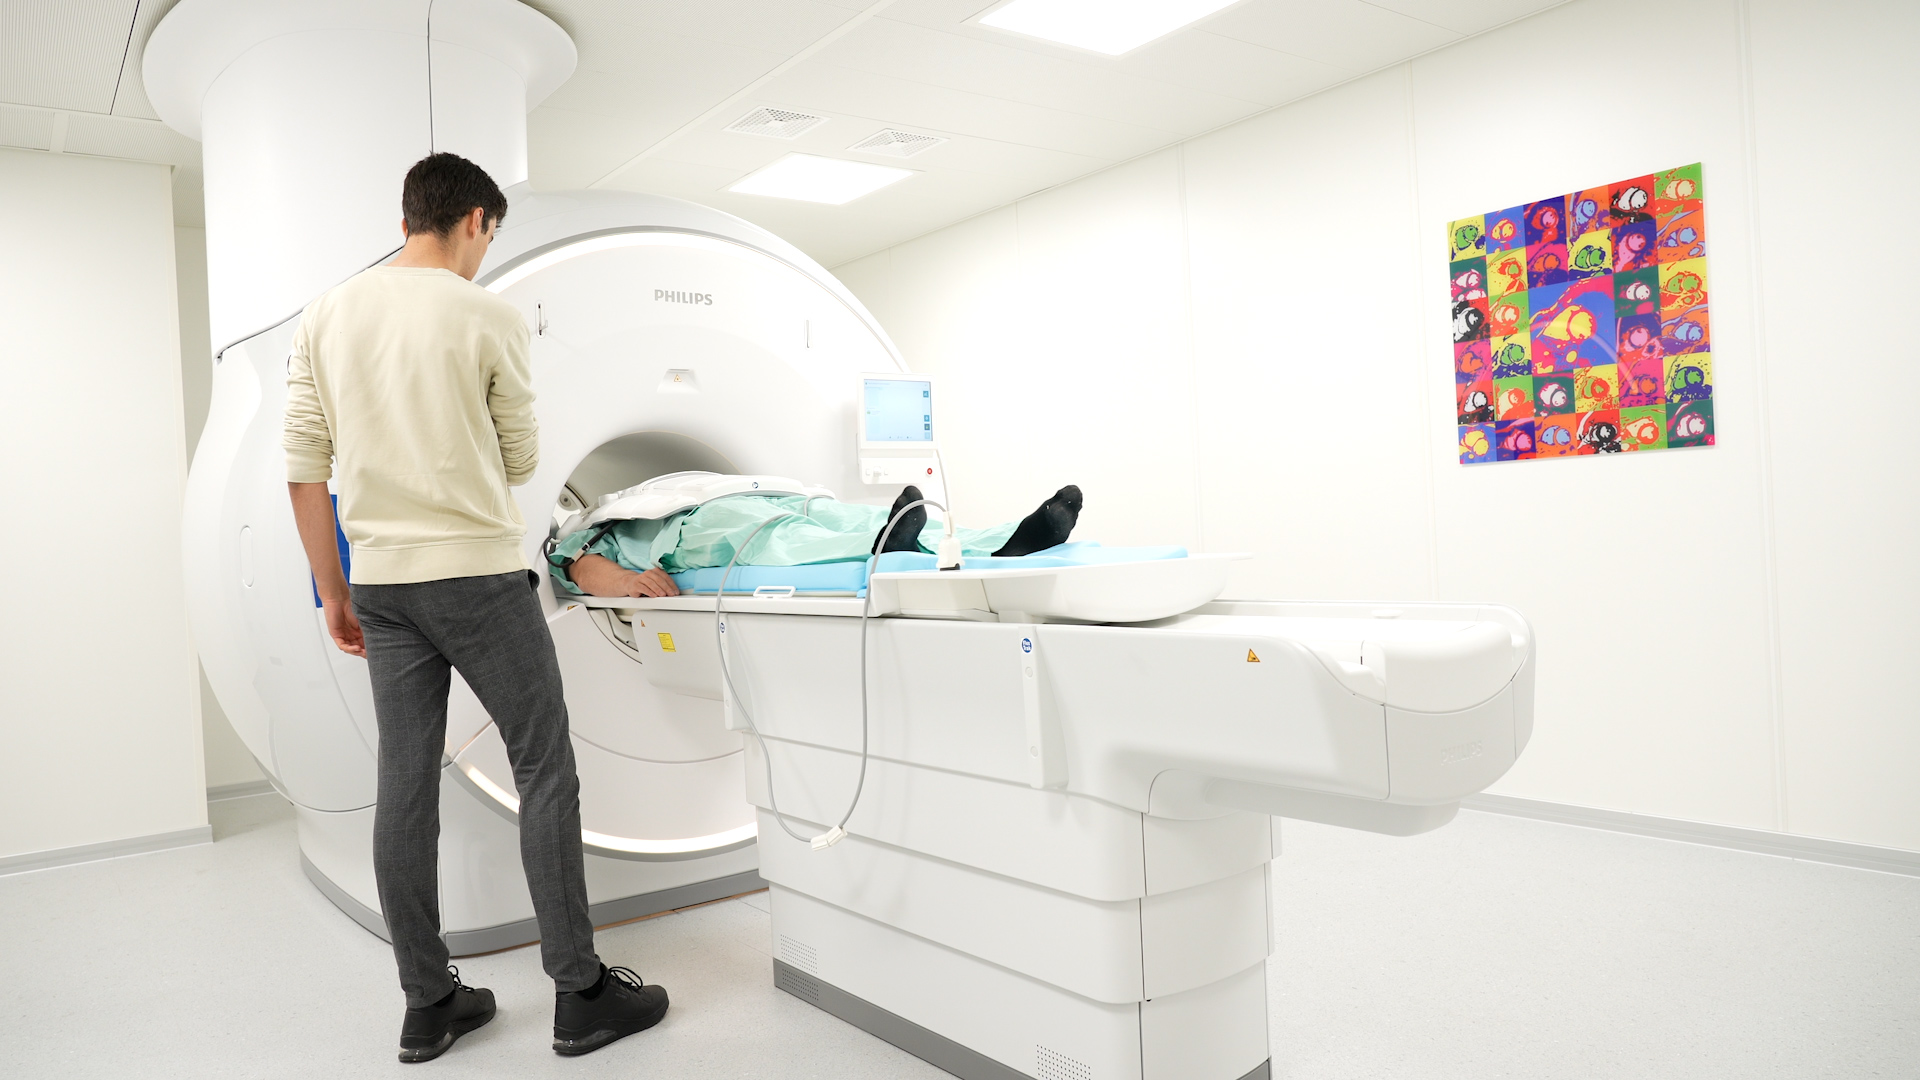 A person is lying in the MRI scanner and is being checked by a researcher.